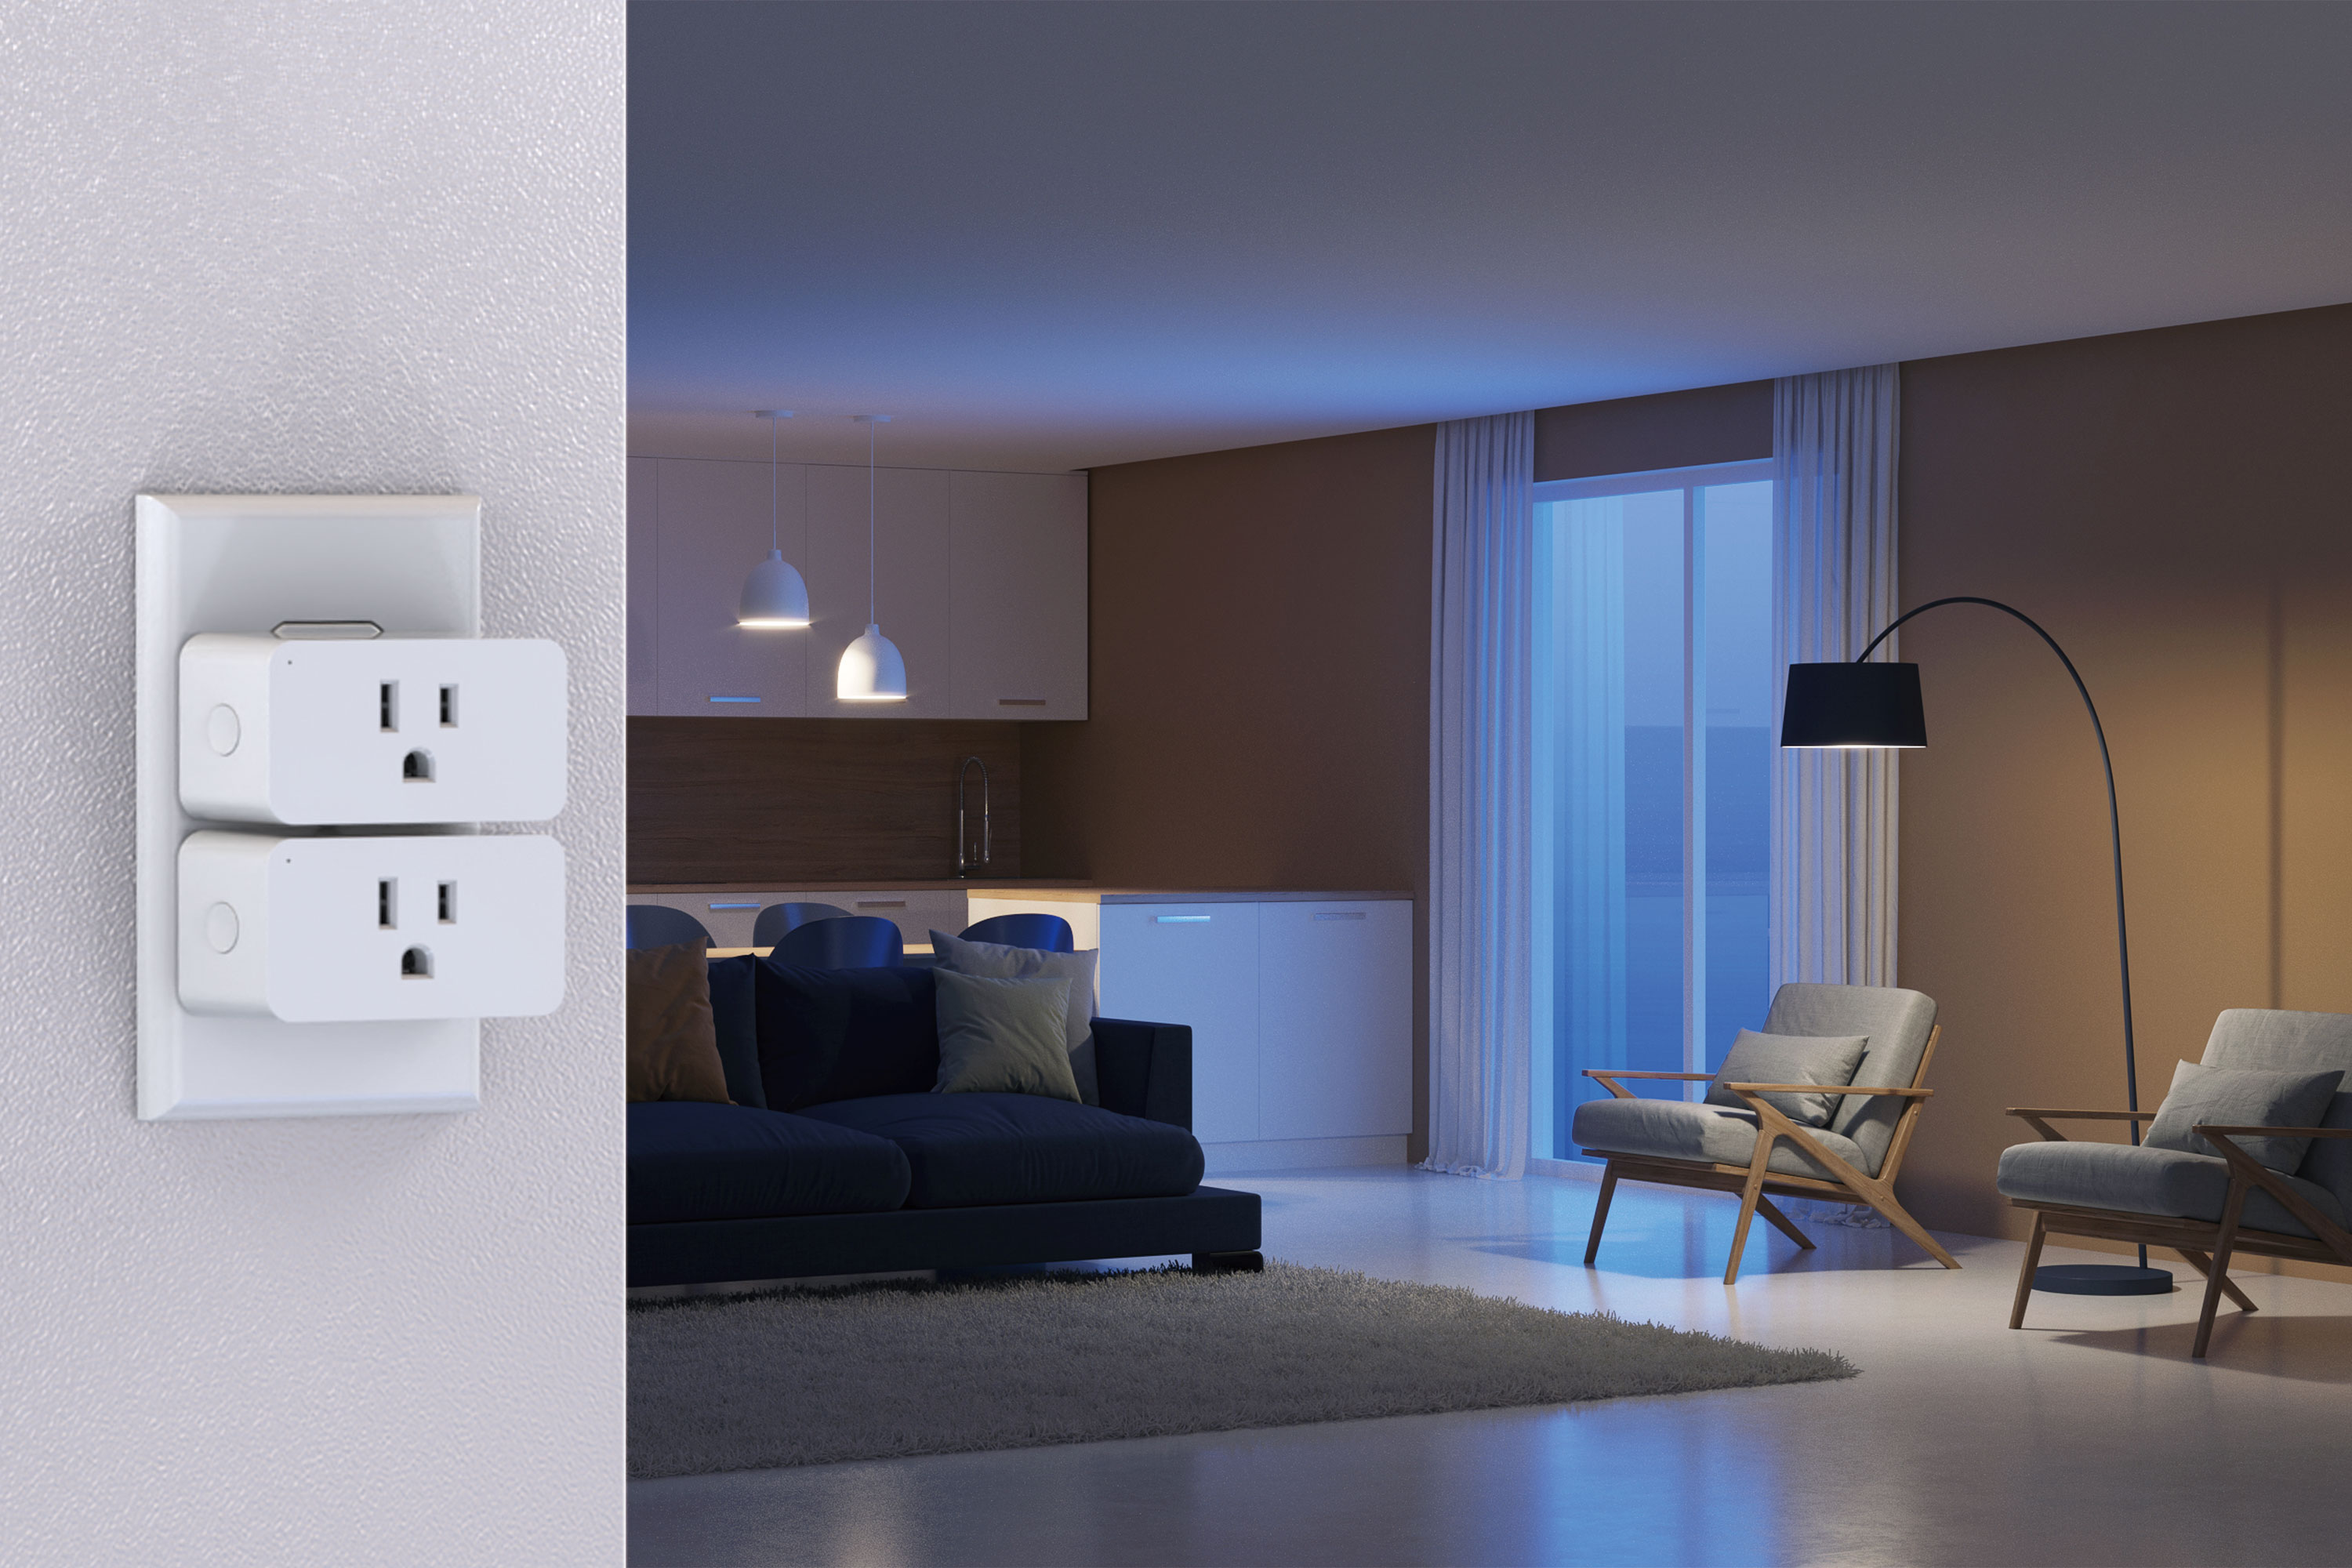 Minoston Outdoor Smart Plug Wi-Fi Plugs Outlet with 2 Individual